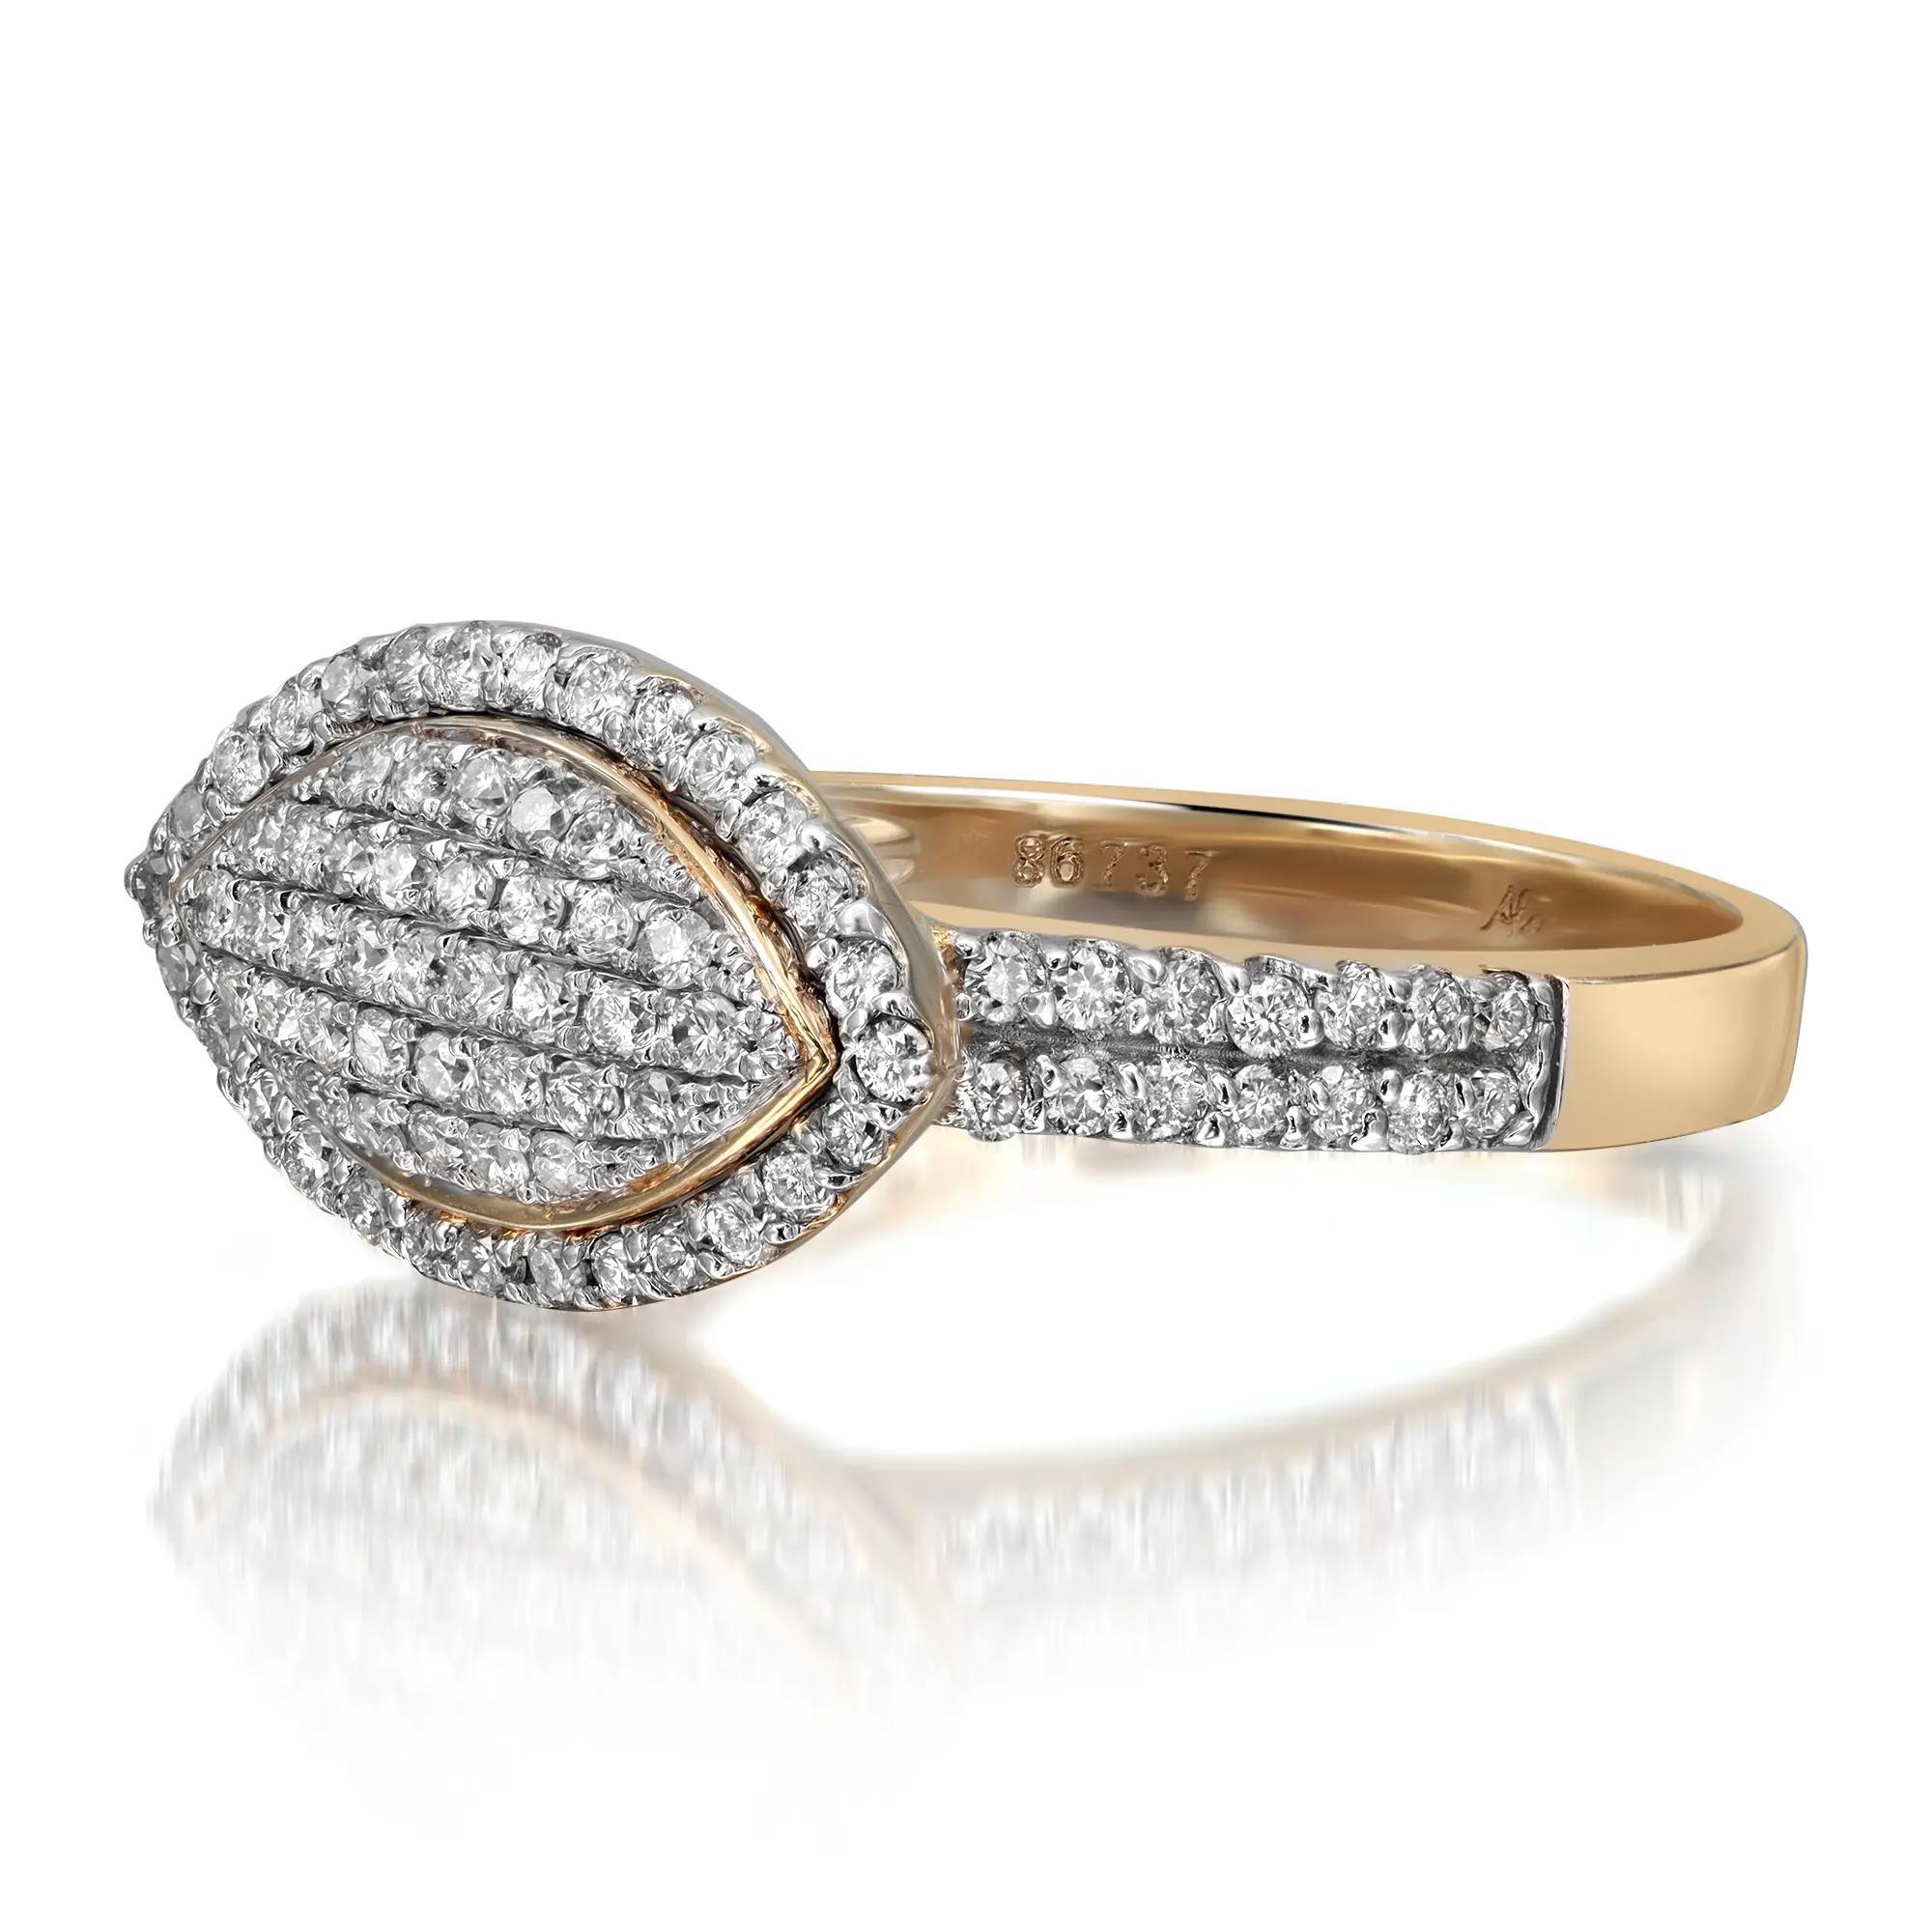 This beautiful diamond cocktail ring is rendered in highly polished 14K yellow gold. This ring features sparkling round cut diamonds in pave setting totaling 0.72 carat. Diamond quality: H - I color and SI1 clarity. Ring size: 7.5. Total weight: